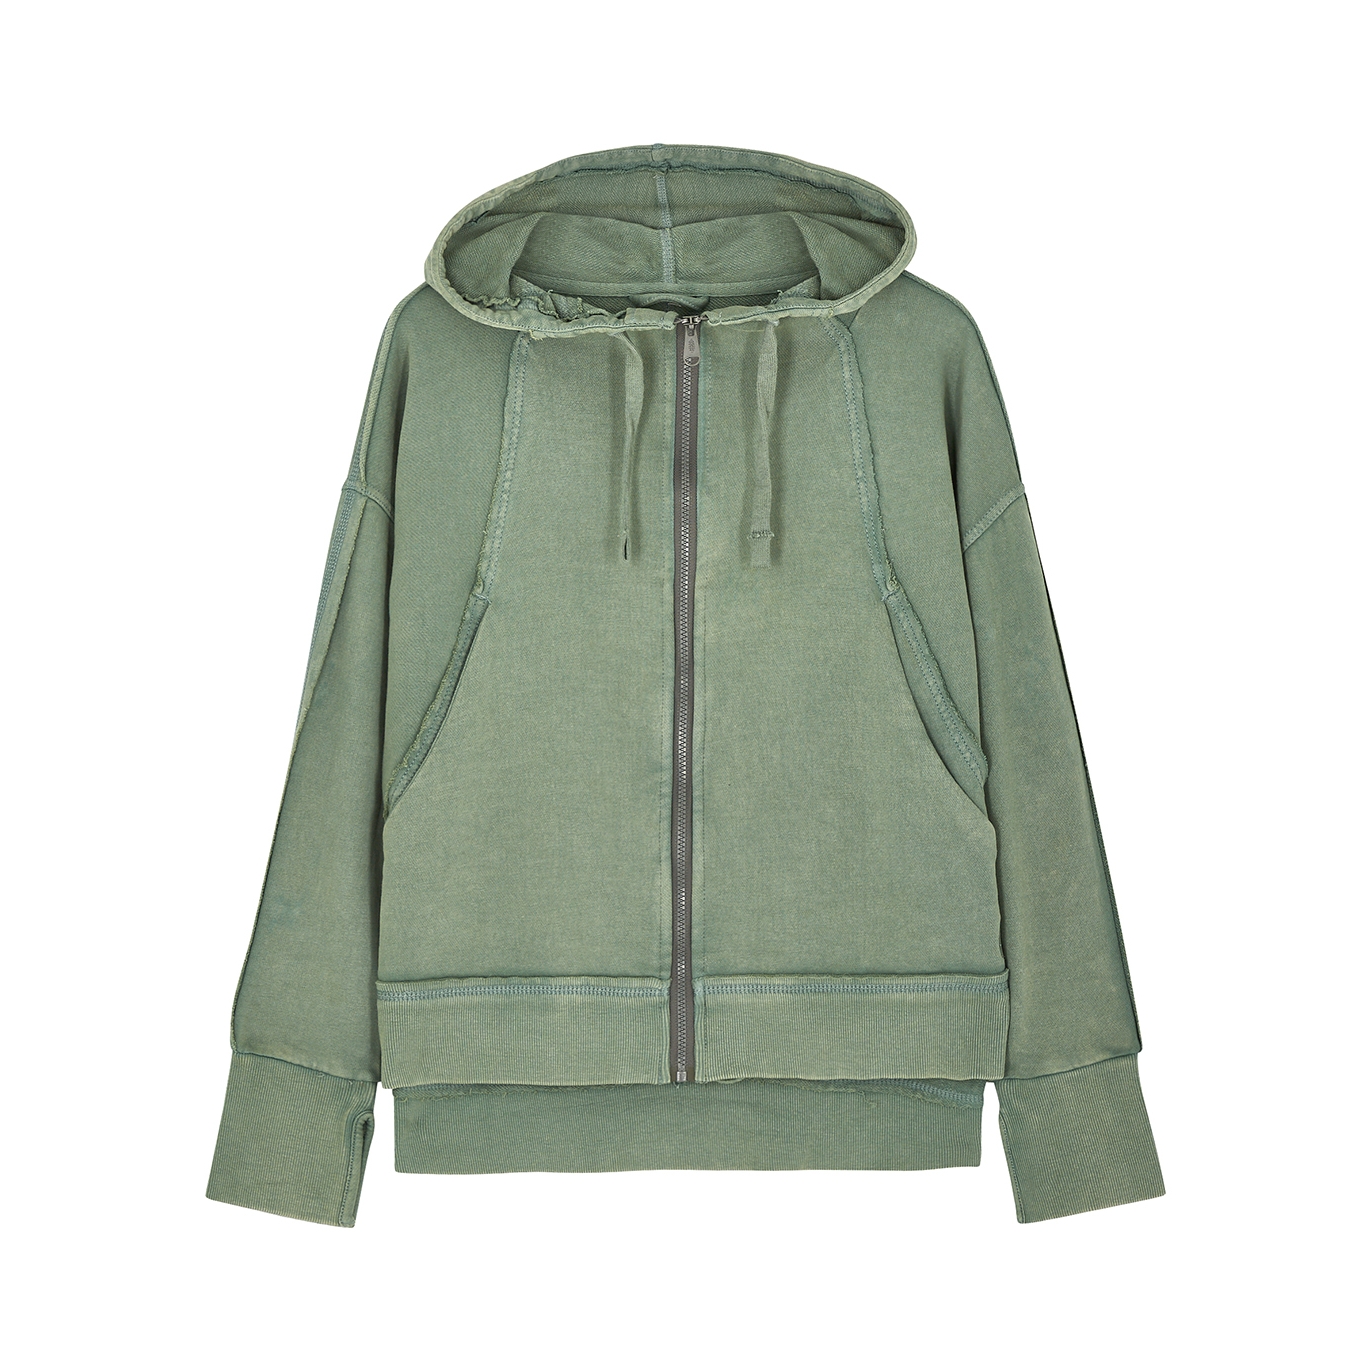 Free People Movement Only One Hooded Cotton Sweatshirt - Dark Green - L